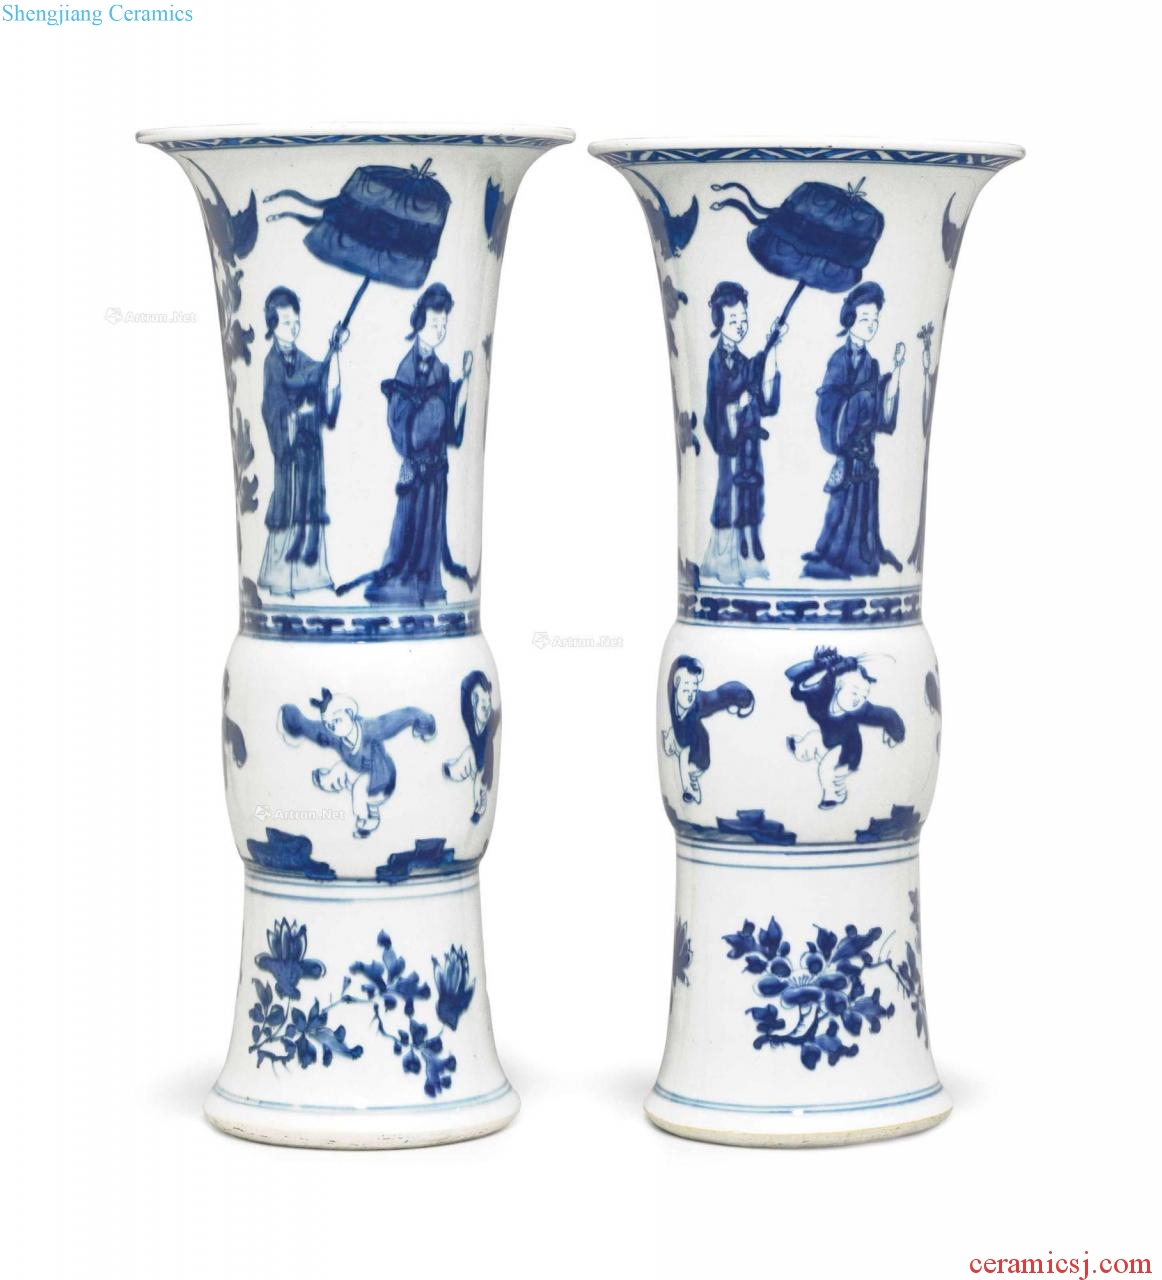 Kangxi period, 1662-1722, A LARGE PAIR OF BLUE AND WHITE GU VASES